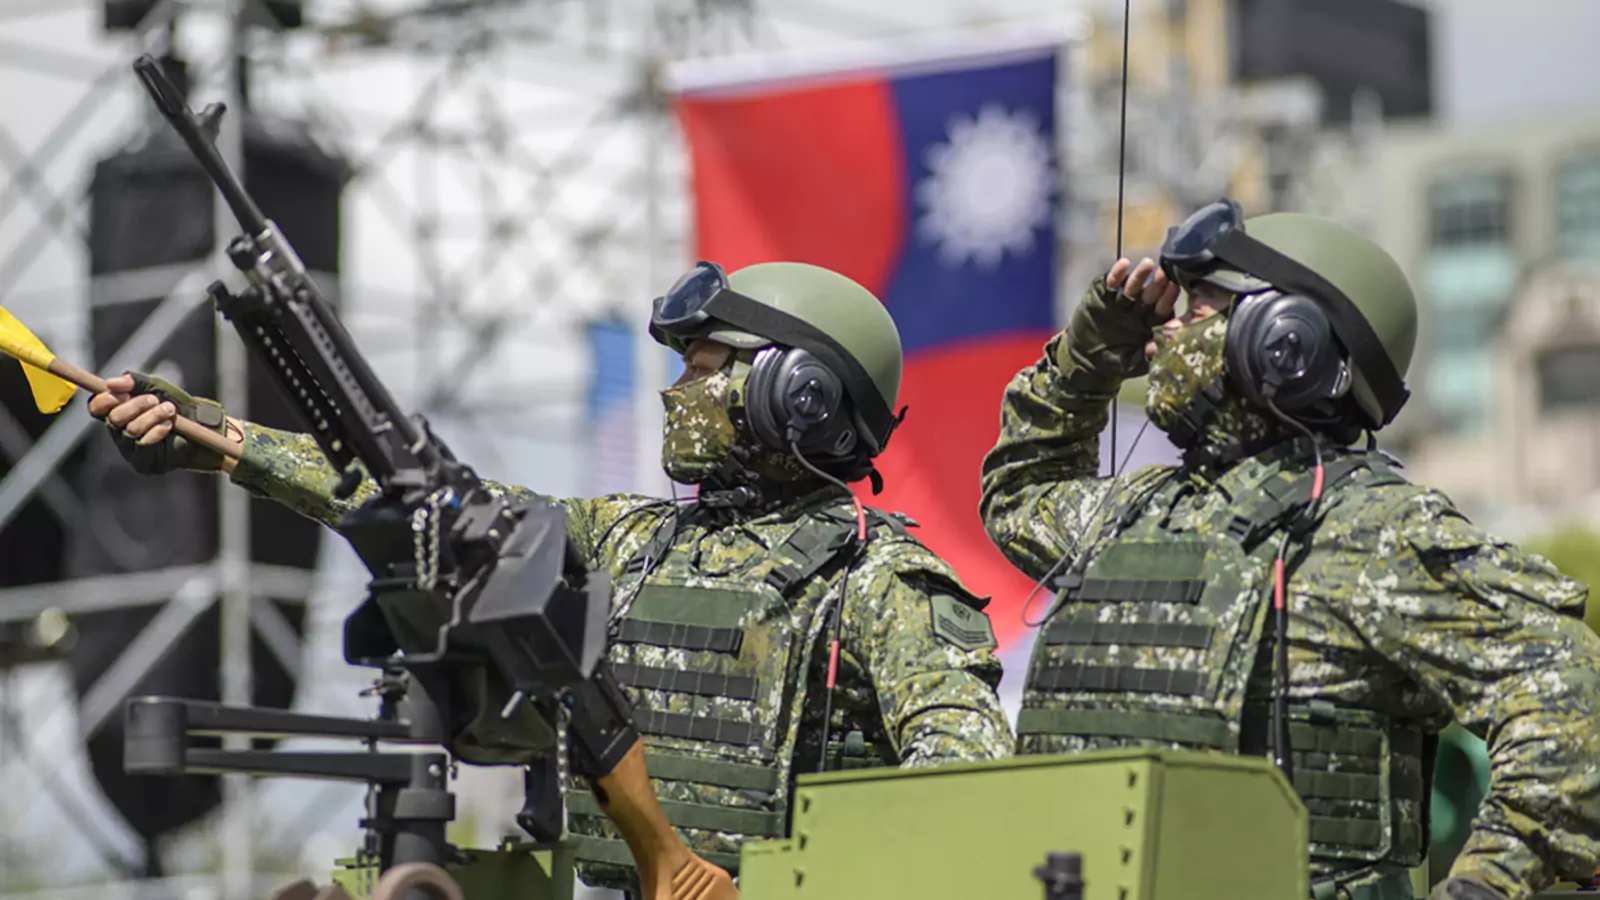 Armored vehicles from Taiwan’s military parade in front of the presidential palace on Taiwan’s 110th birthday. 